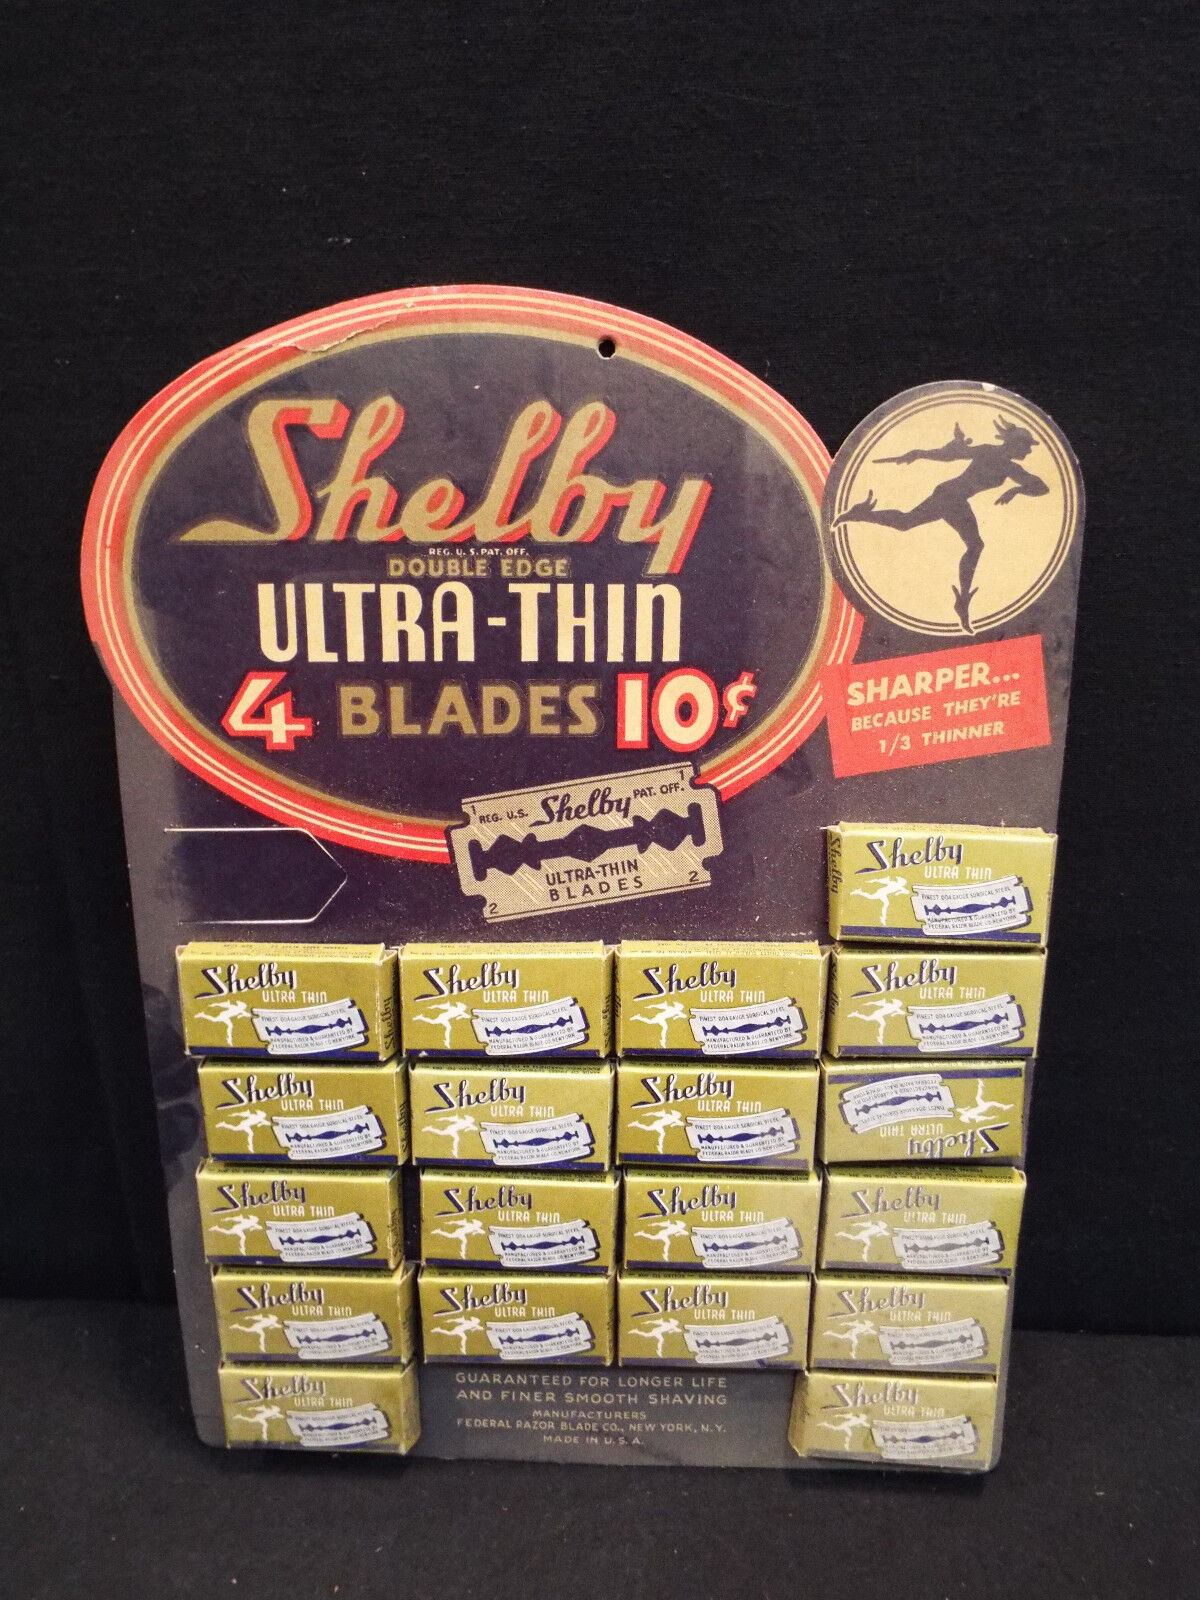 Vintage Shelby Razor Blades Barbershop Display Card With 19 packages Exc Shelbu Ultra This Blades